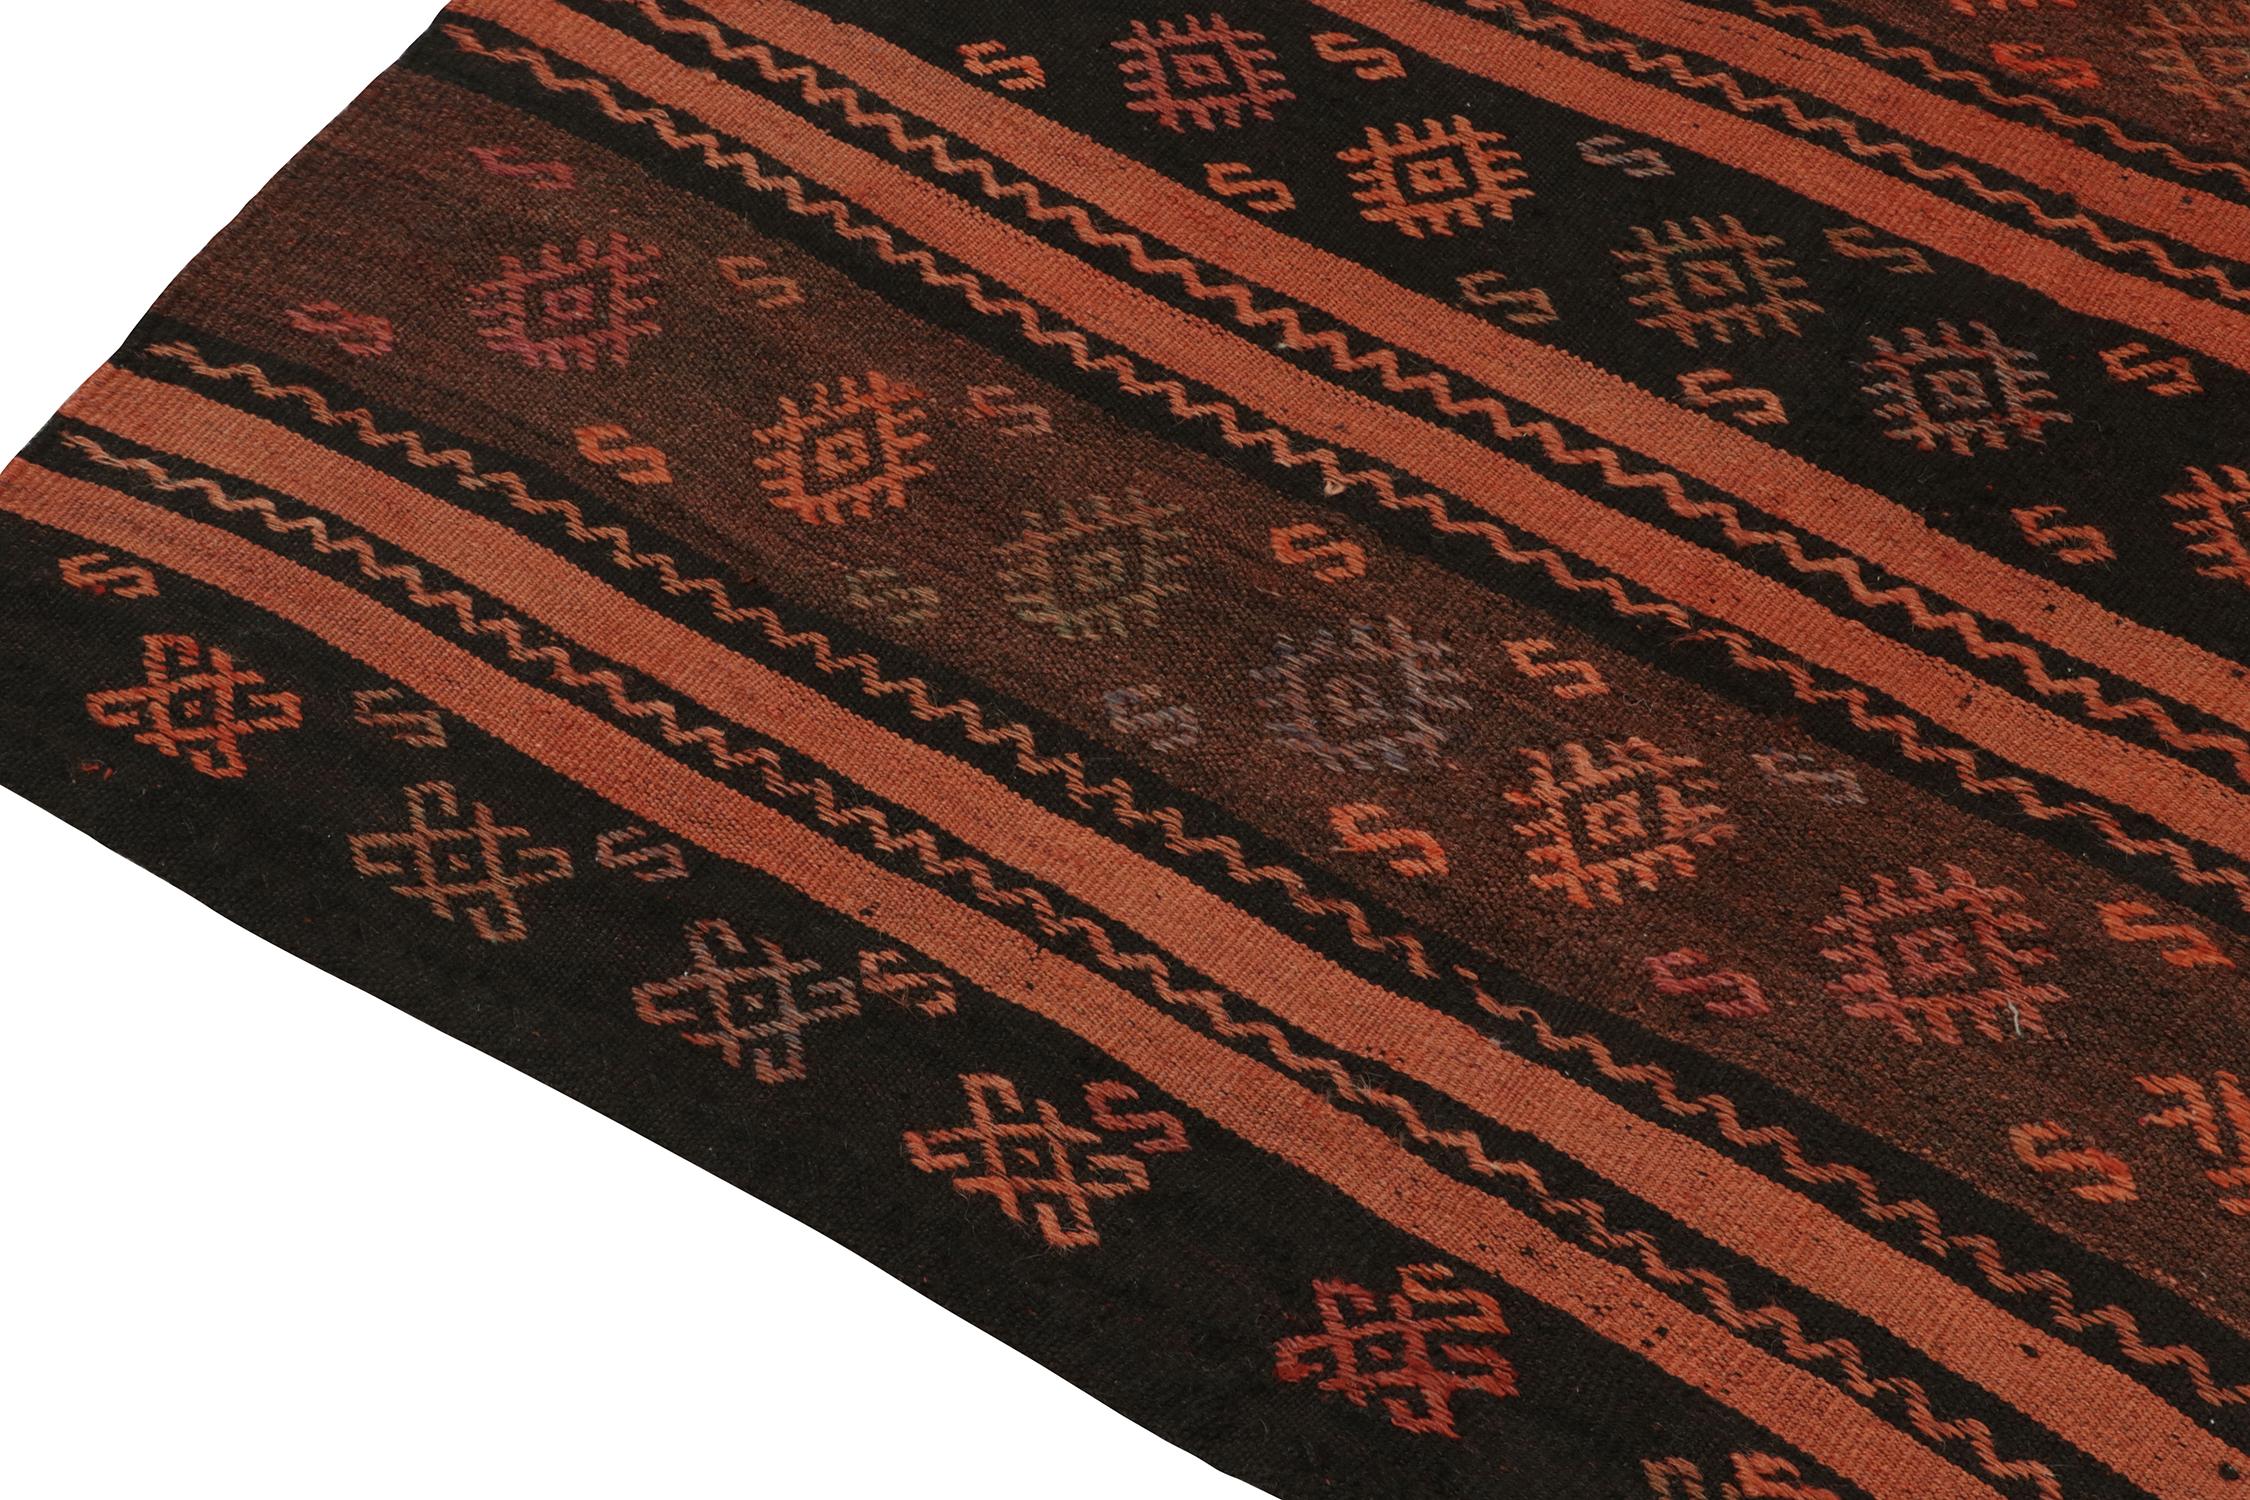 Hand-Knotted Vintage Gallery-Sized Kilim in Orange and Black Stripes Patterns by Rug & Kilim For Sale